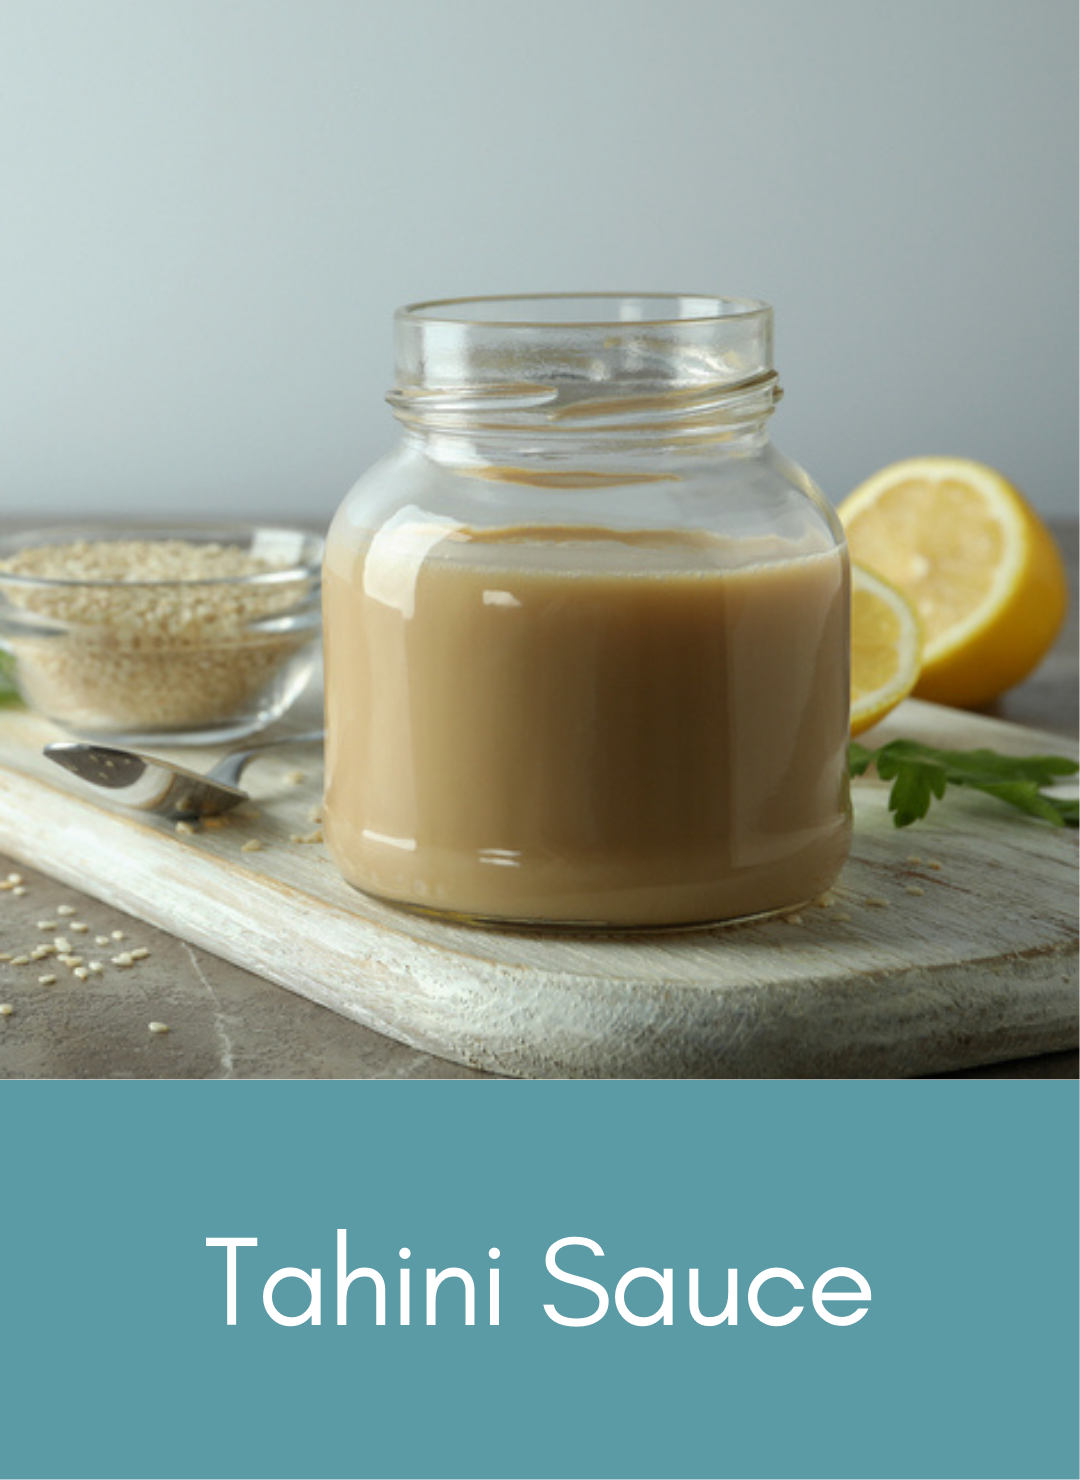 Whole food plant based Tahini sauce Picture with link to recipe